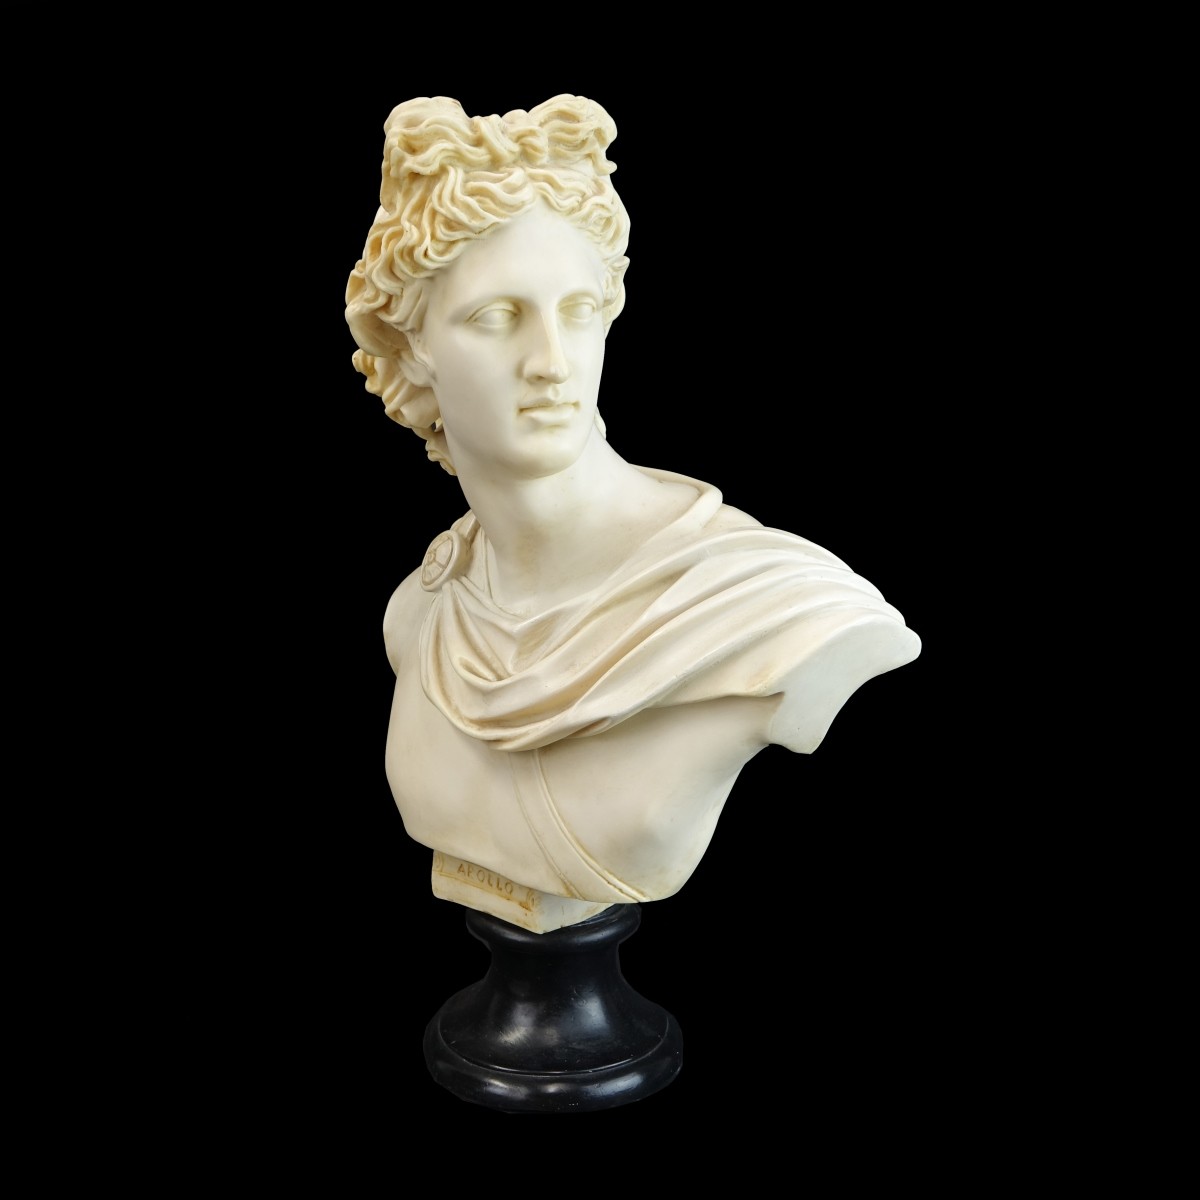 Large Composition Bust of Apollo